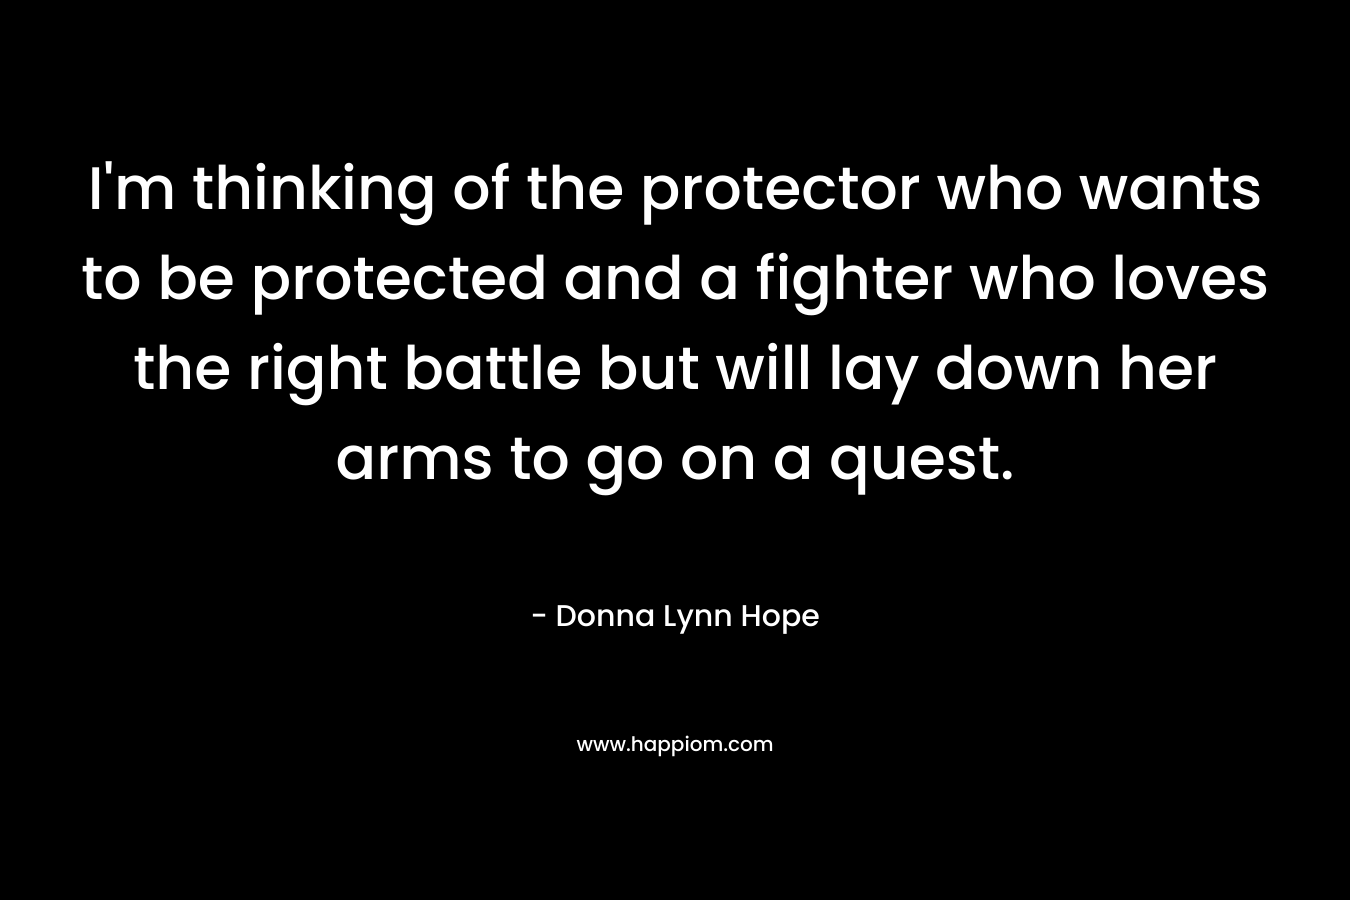 I'm thinking of the protector who wants to be protected and a fighter who loves the right battle but will lay down her arms to go on a quest.